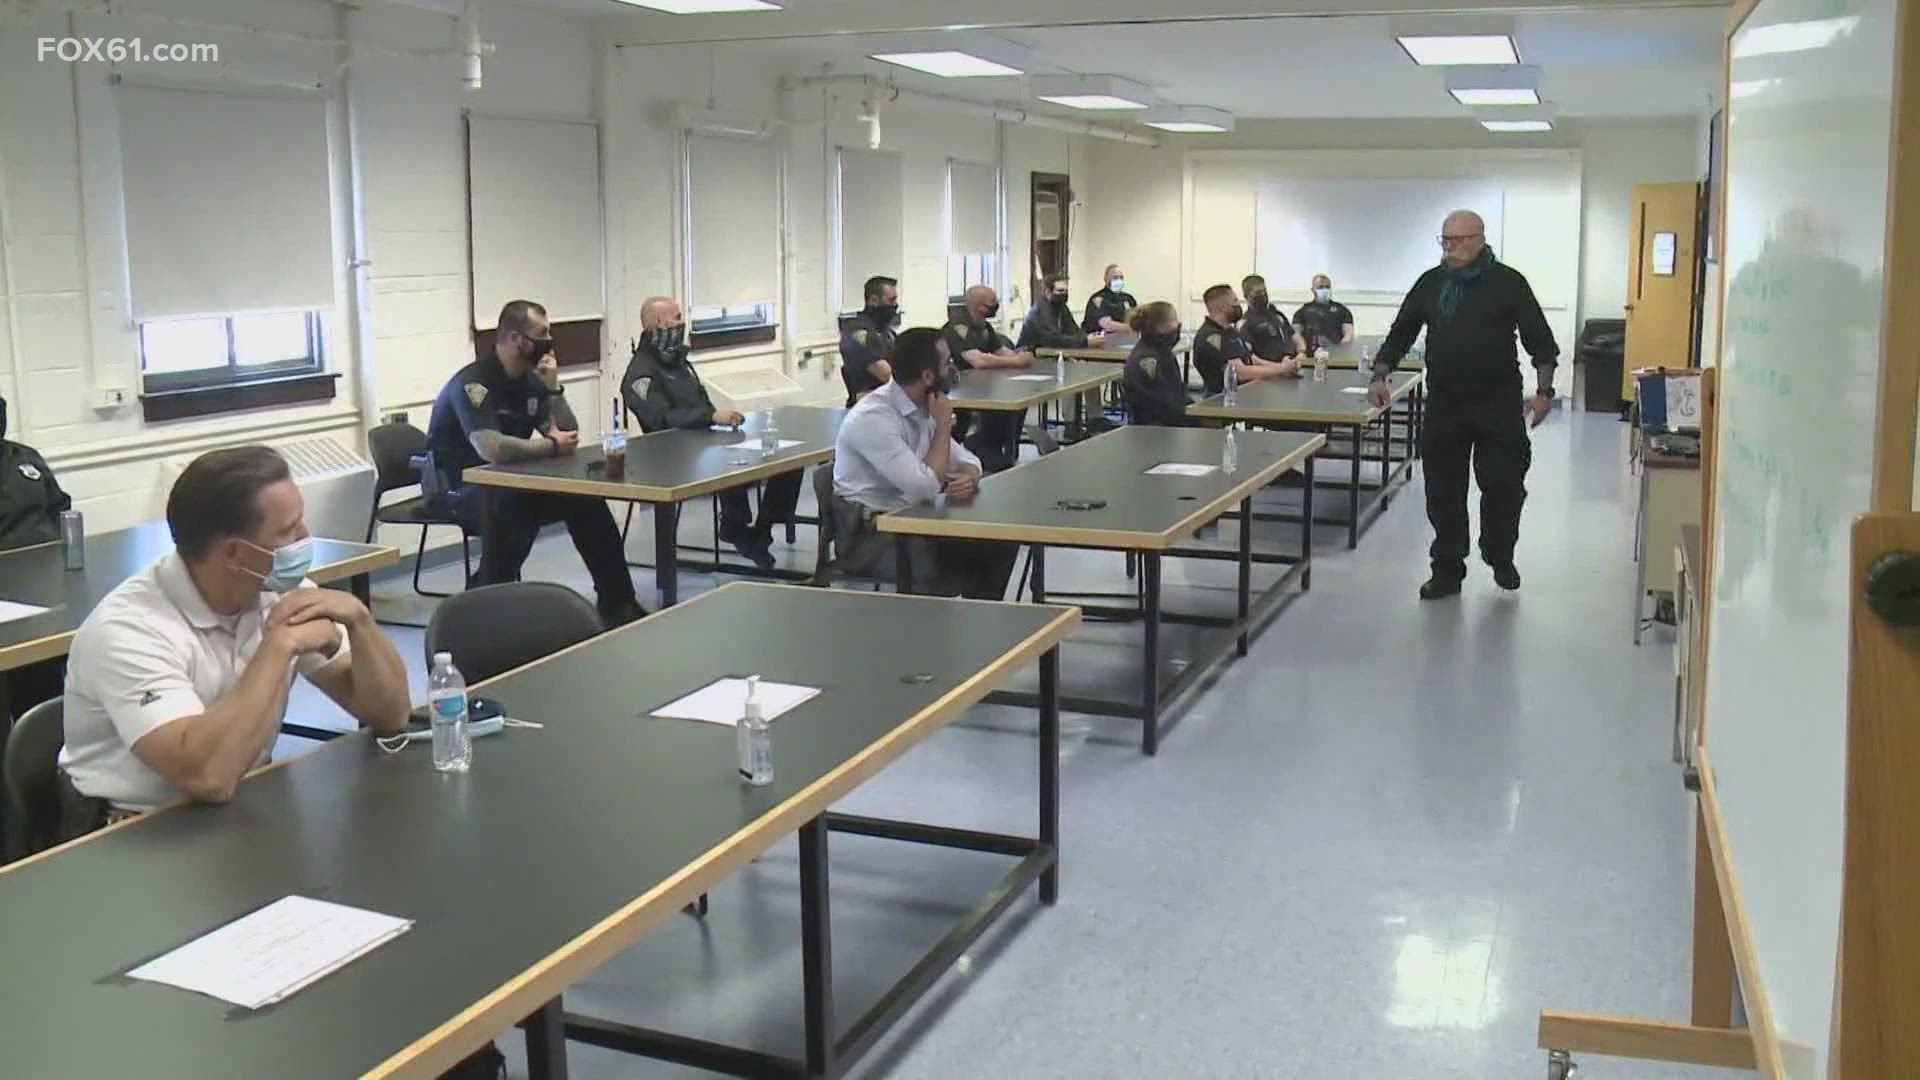 All New Haven police officers will take part in the training